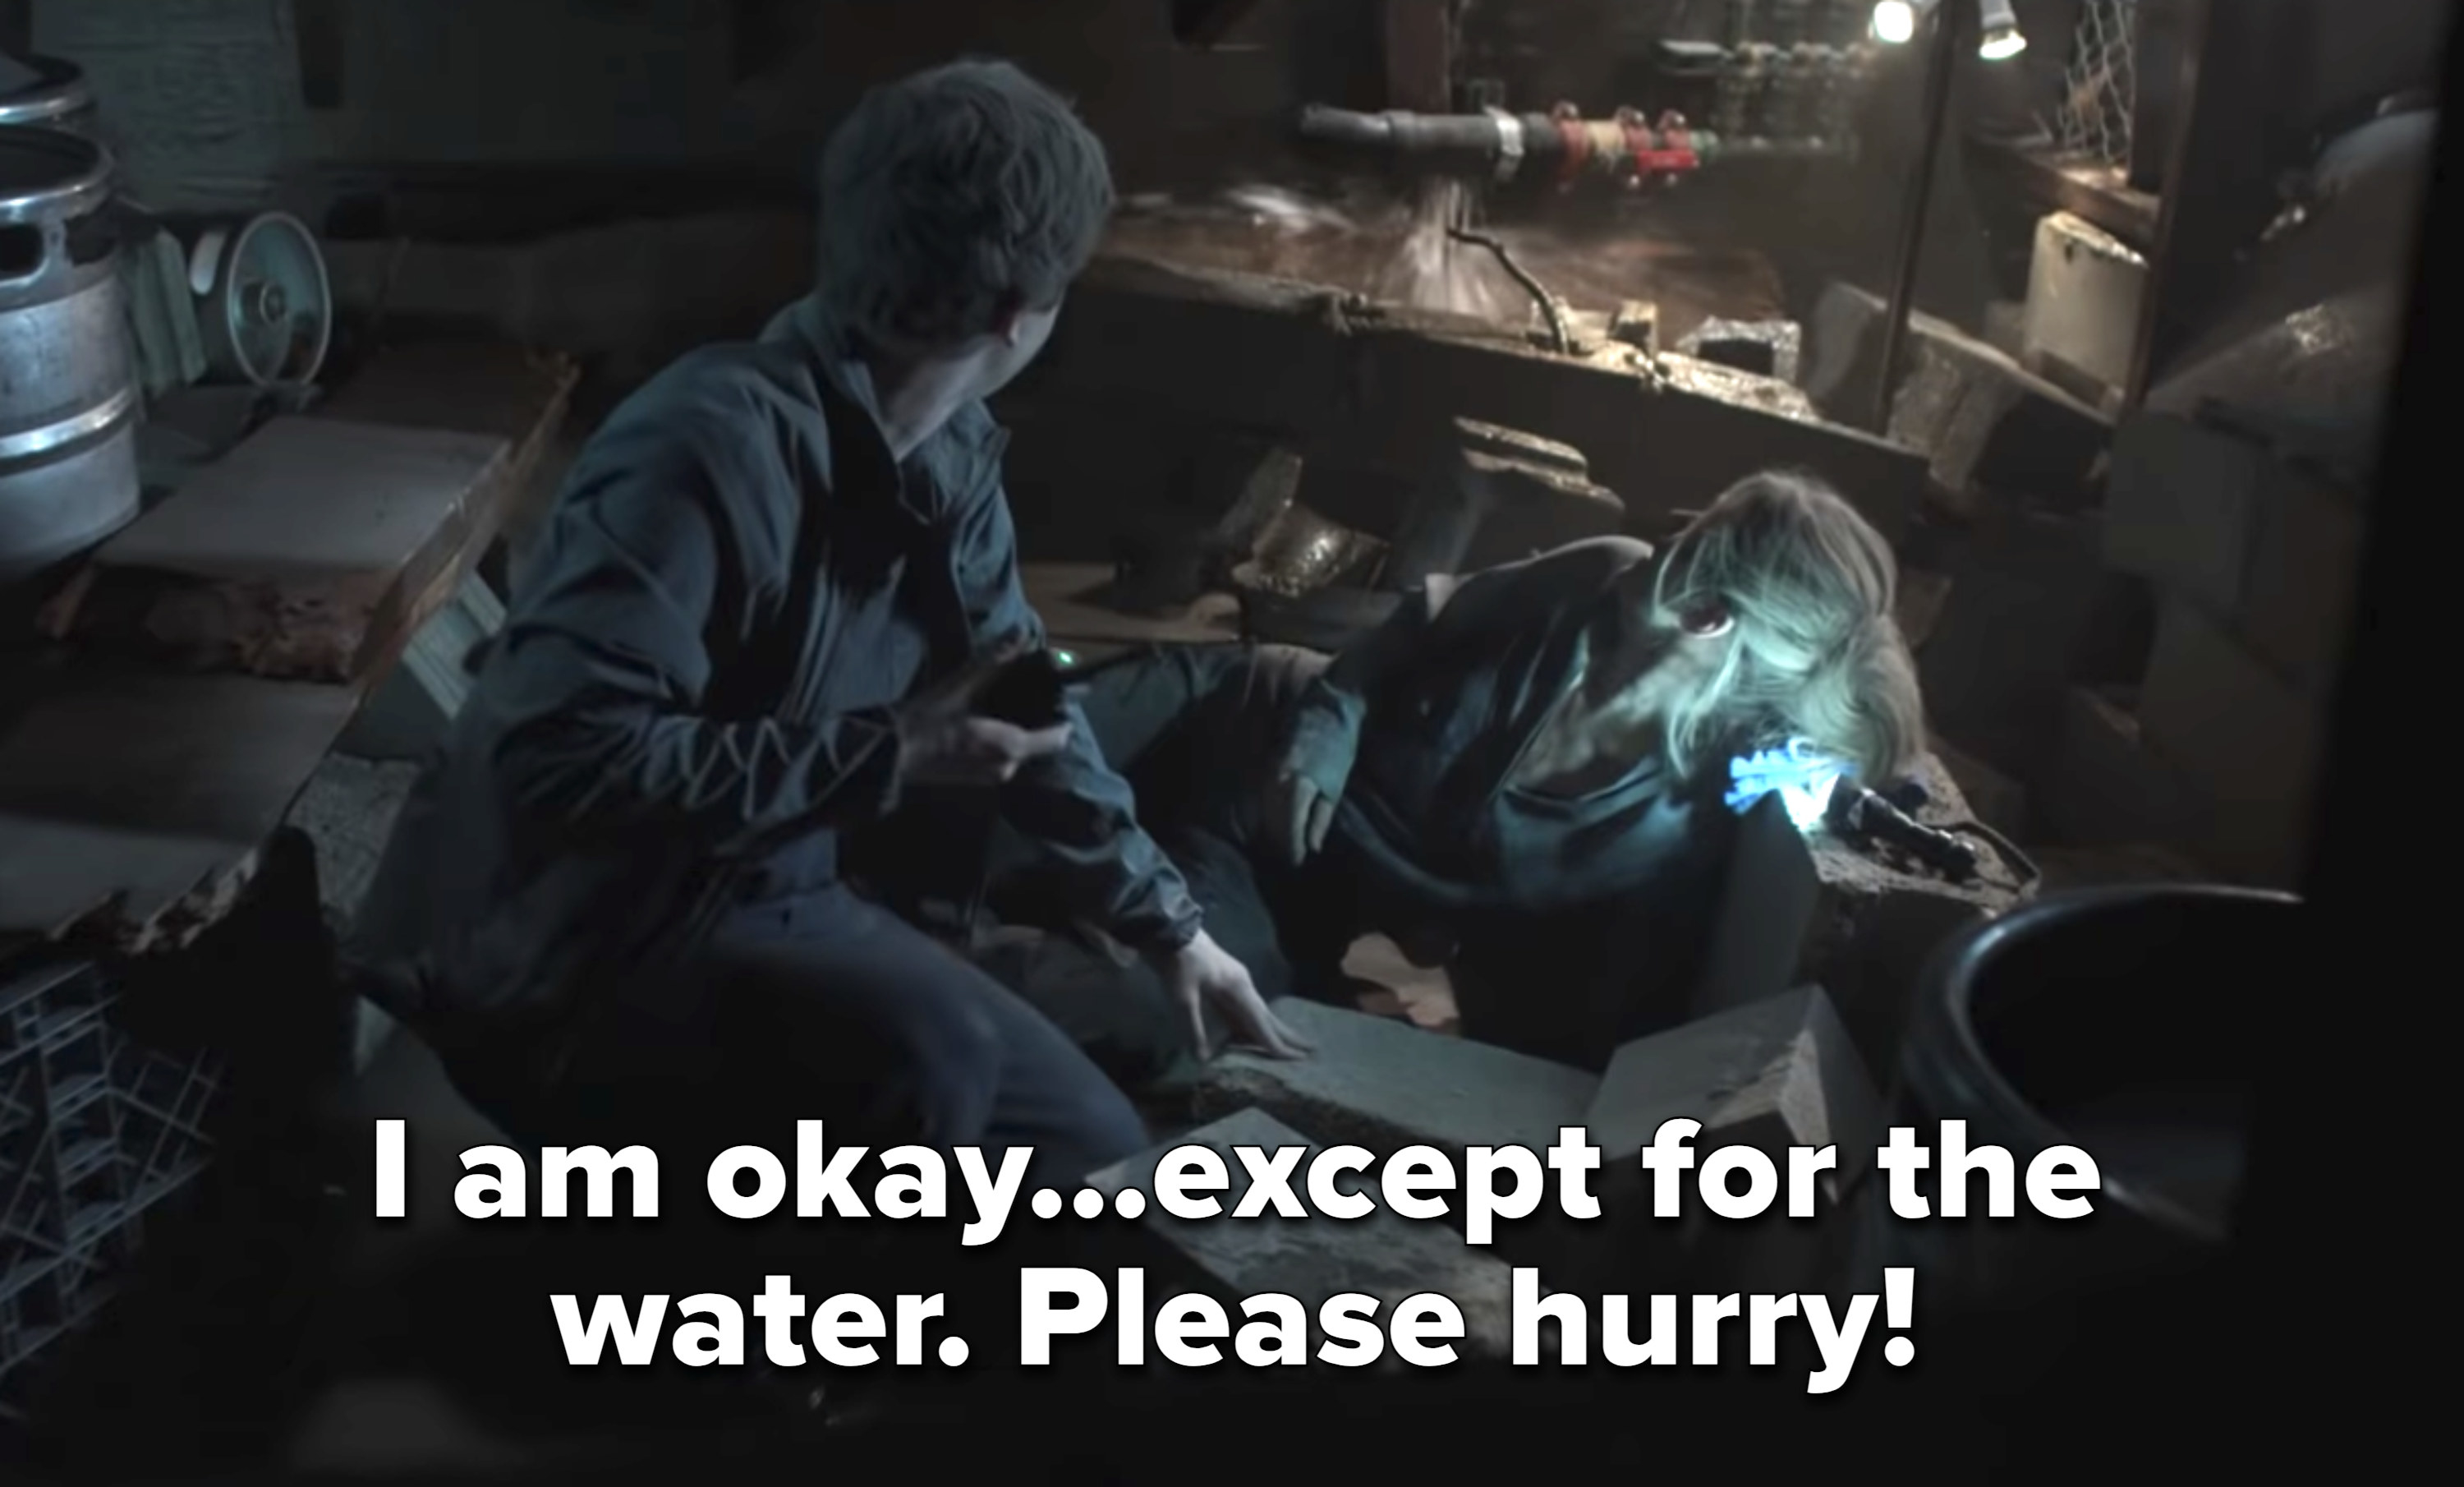 in the basement, Shawn says &quot;I am okay...except for the water. Please hurry!&quot;